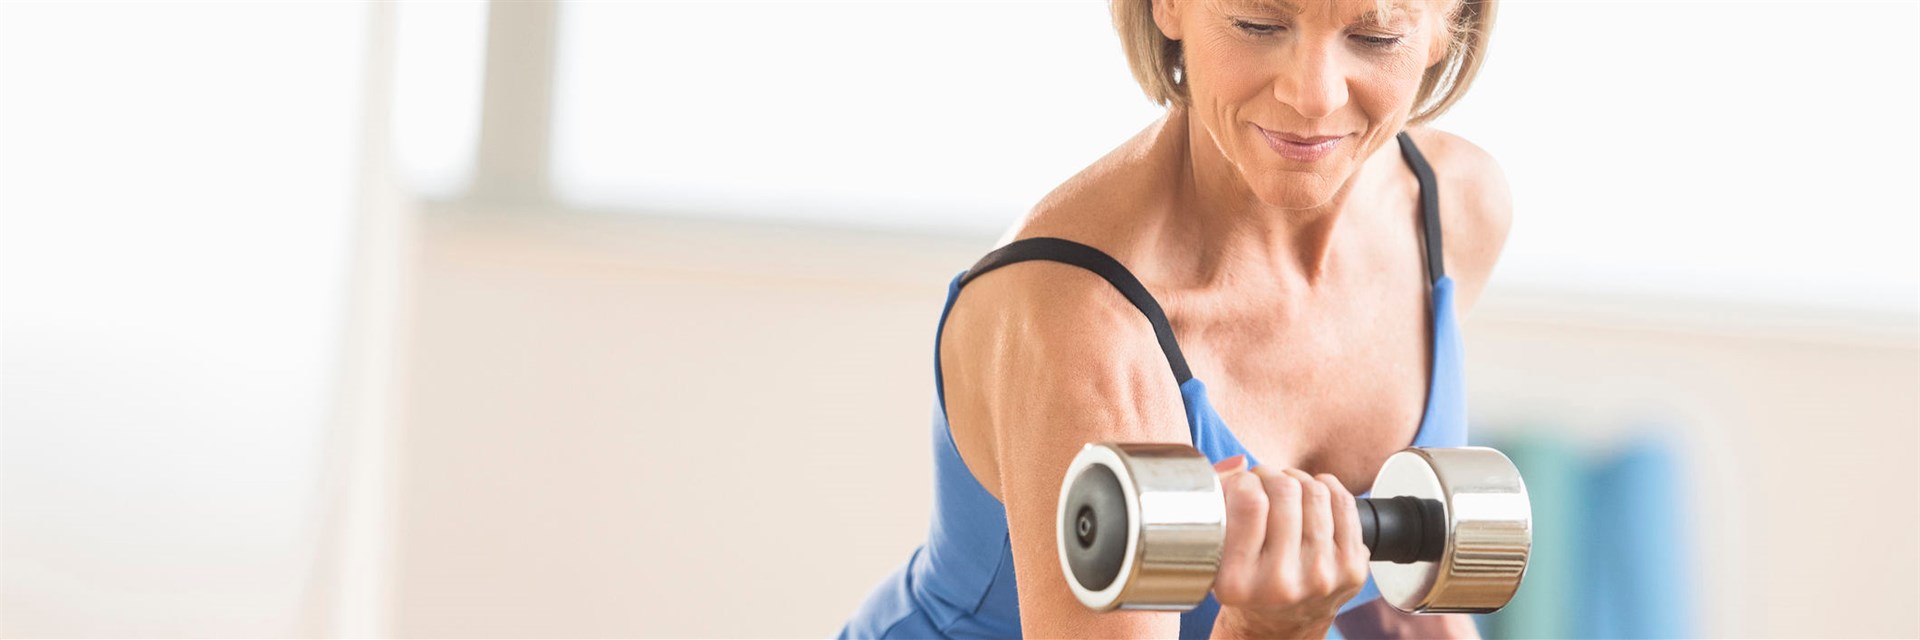 Fit middle-aged woman lifting weights at home